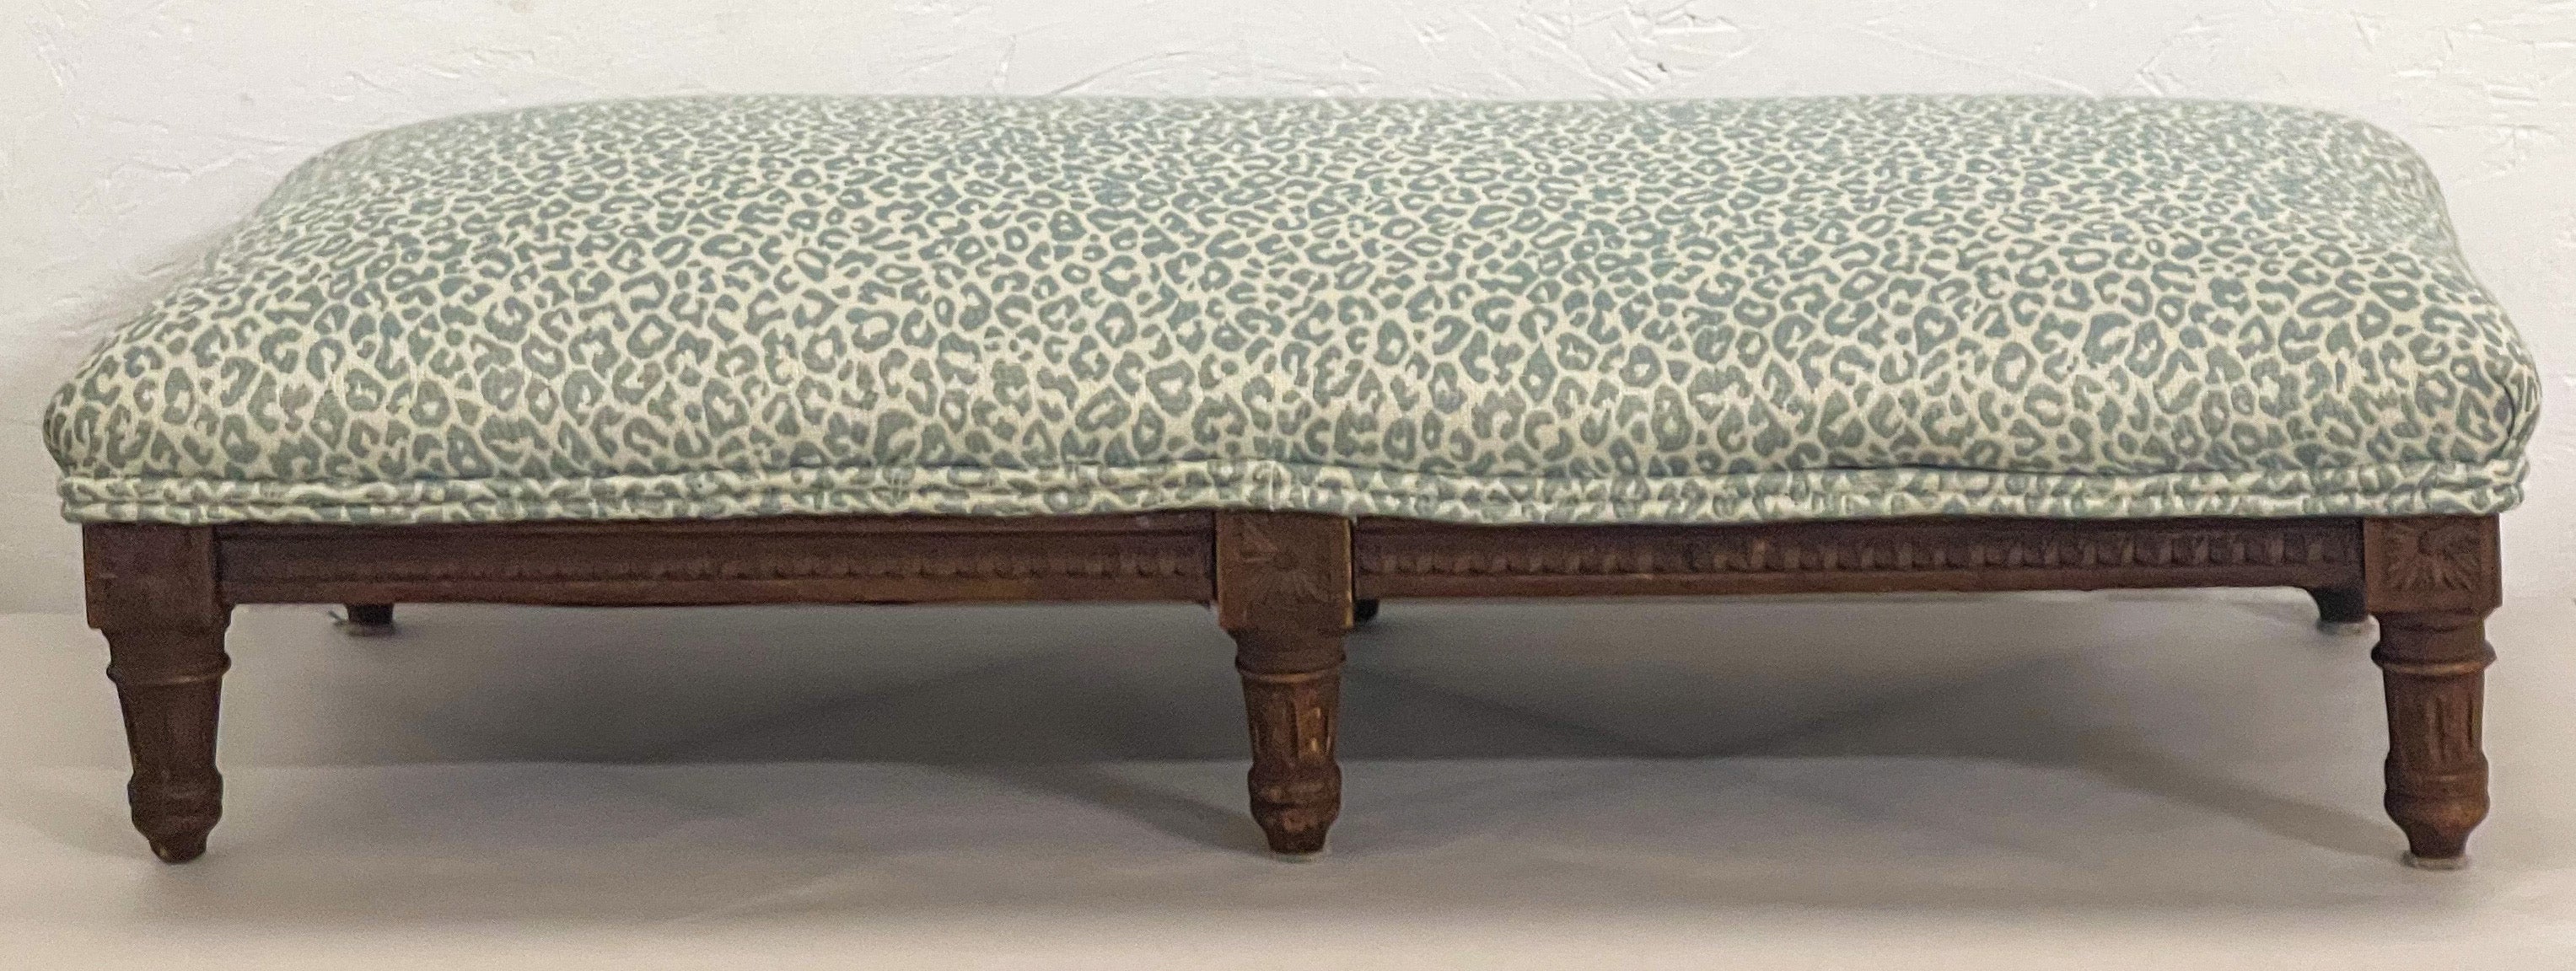 ‘Tis the season! This is an antique French ottoman in a mini celadon leopard. The frame is carved oak and is in very good condition.